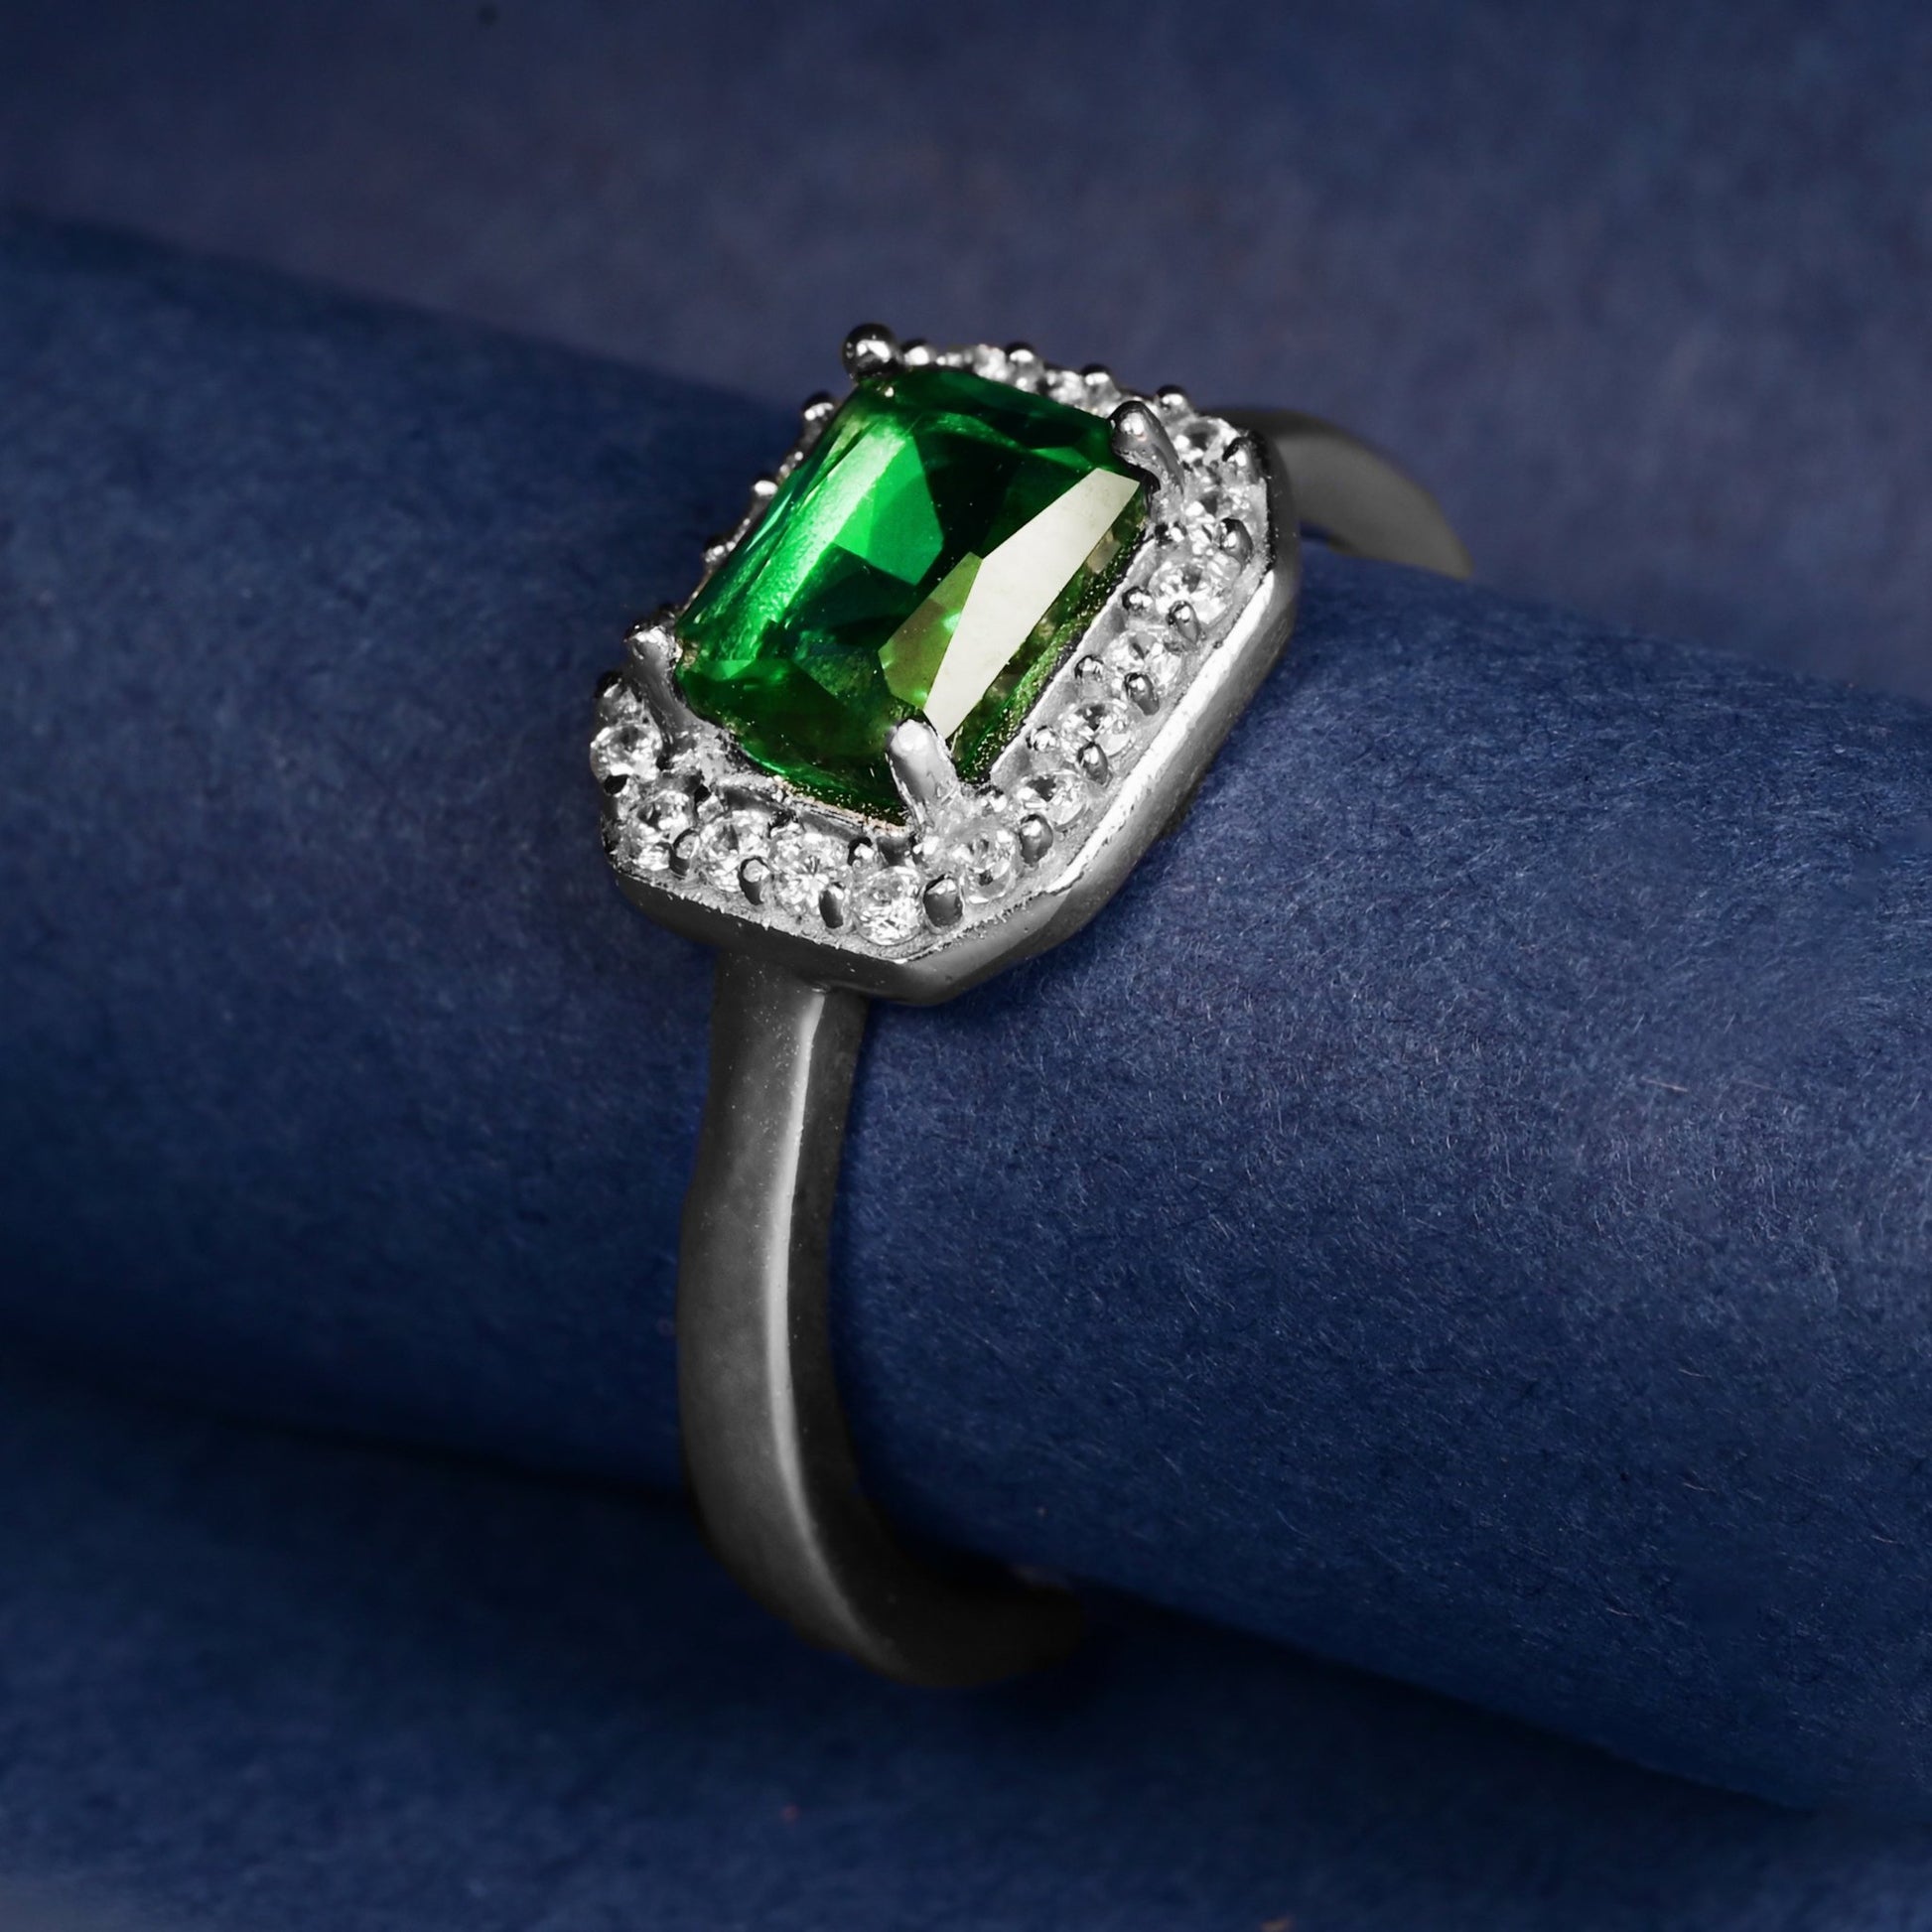 The Emerald Glow Cluster Ring - Vinayak - House of Silver